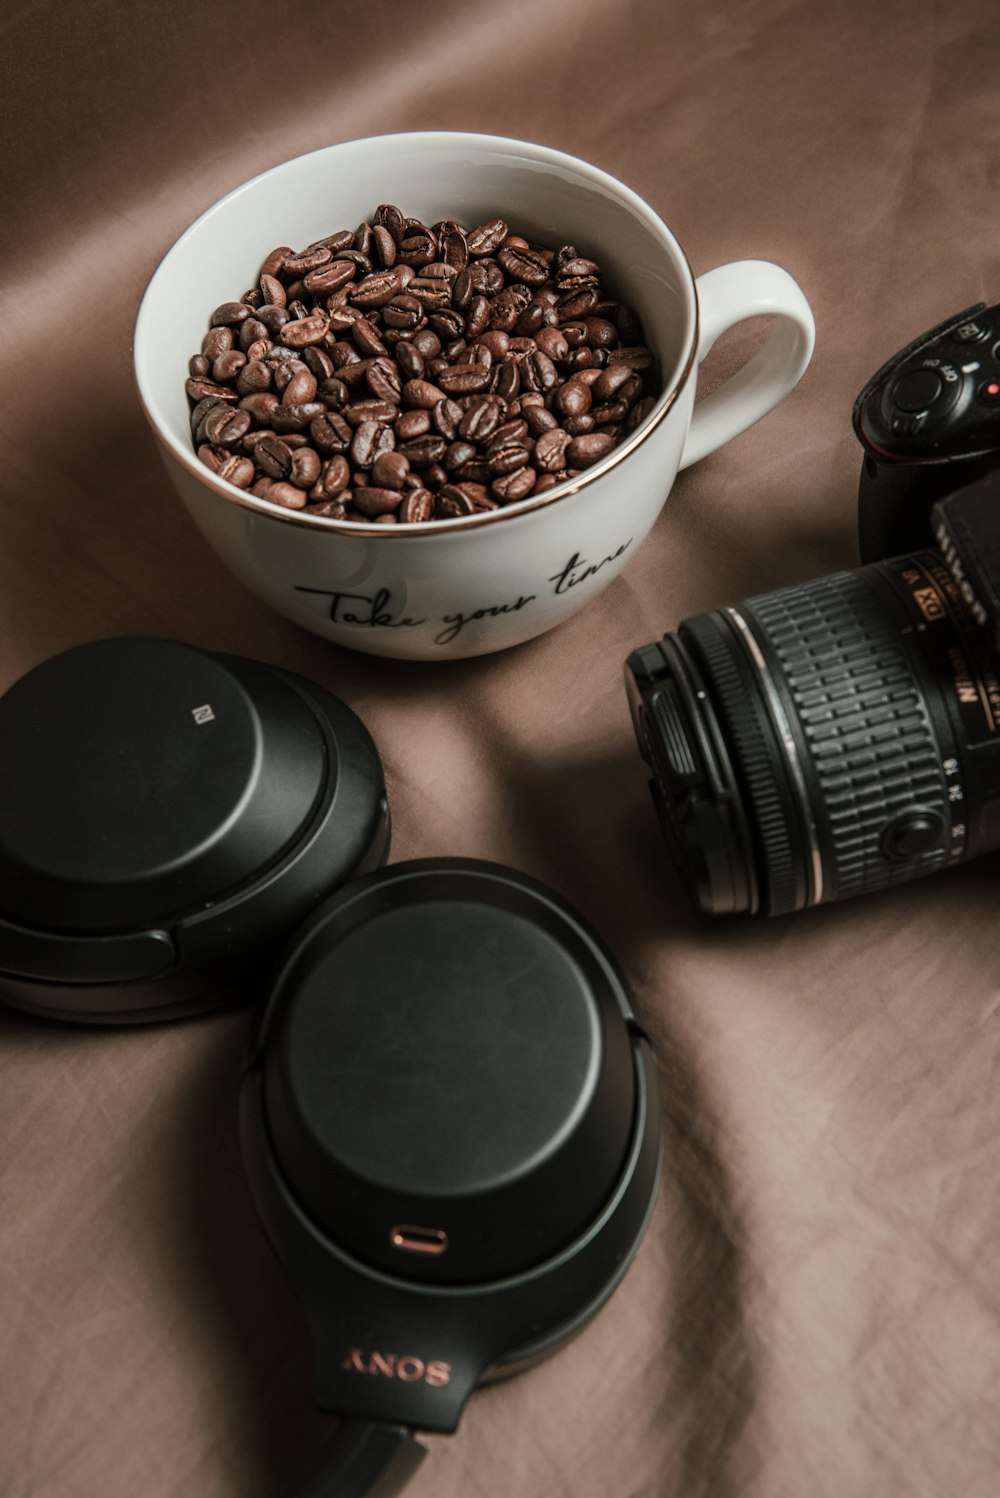 a camera and some coffee beans on a table